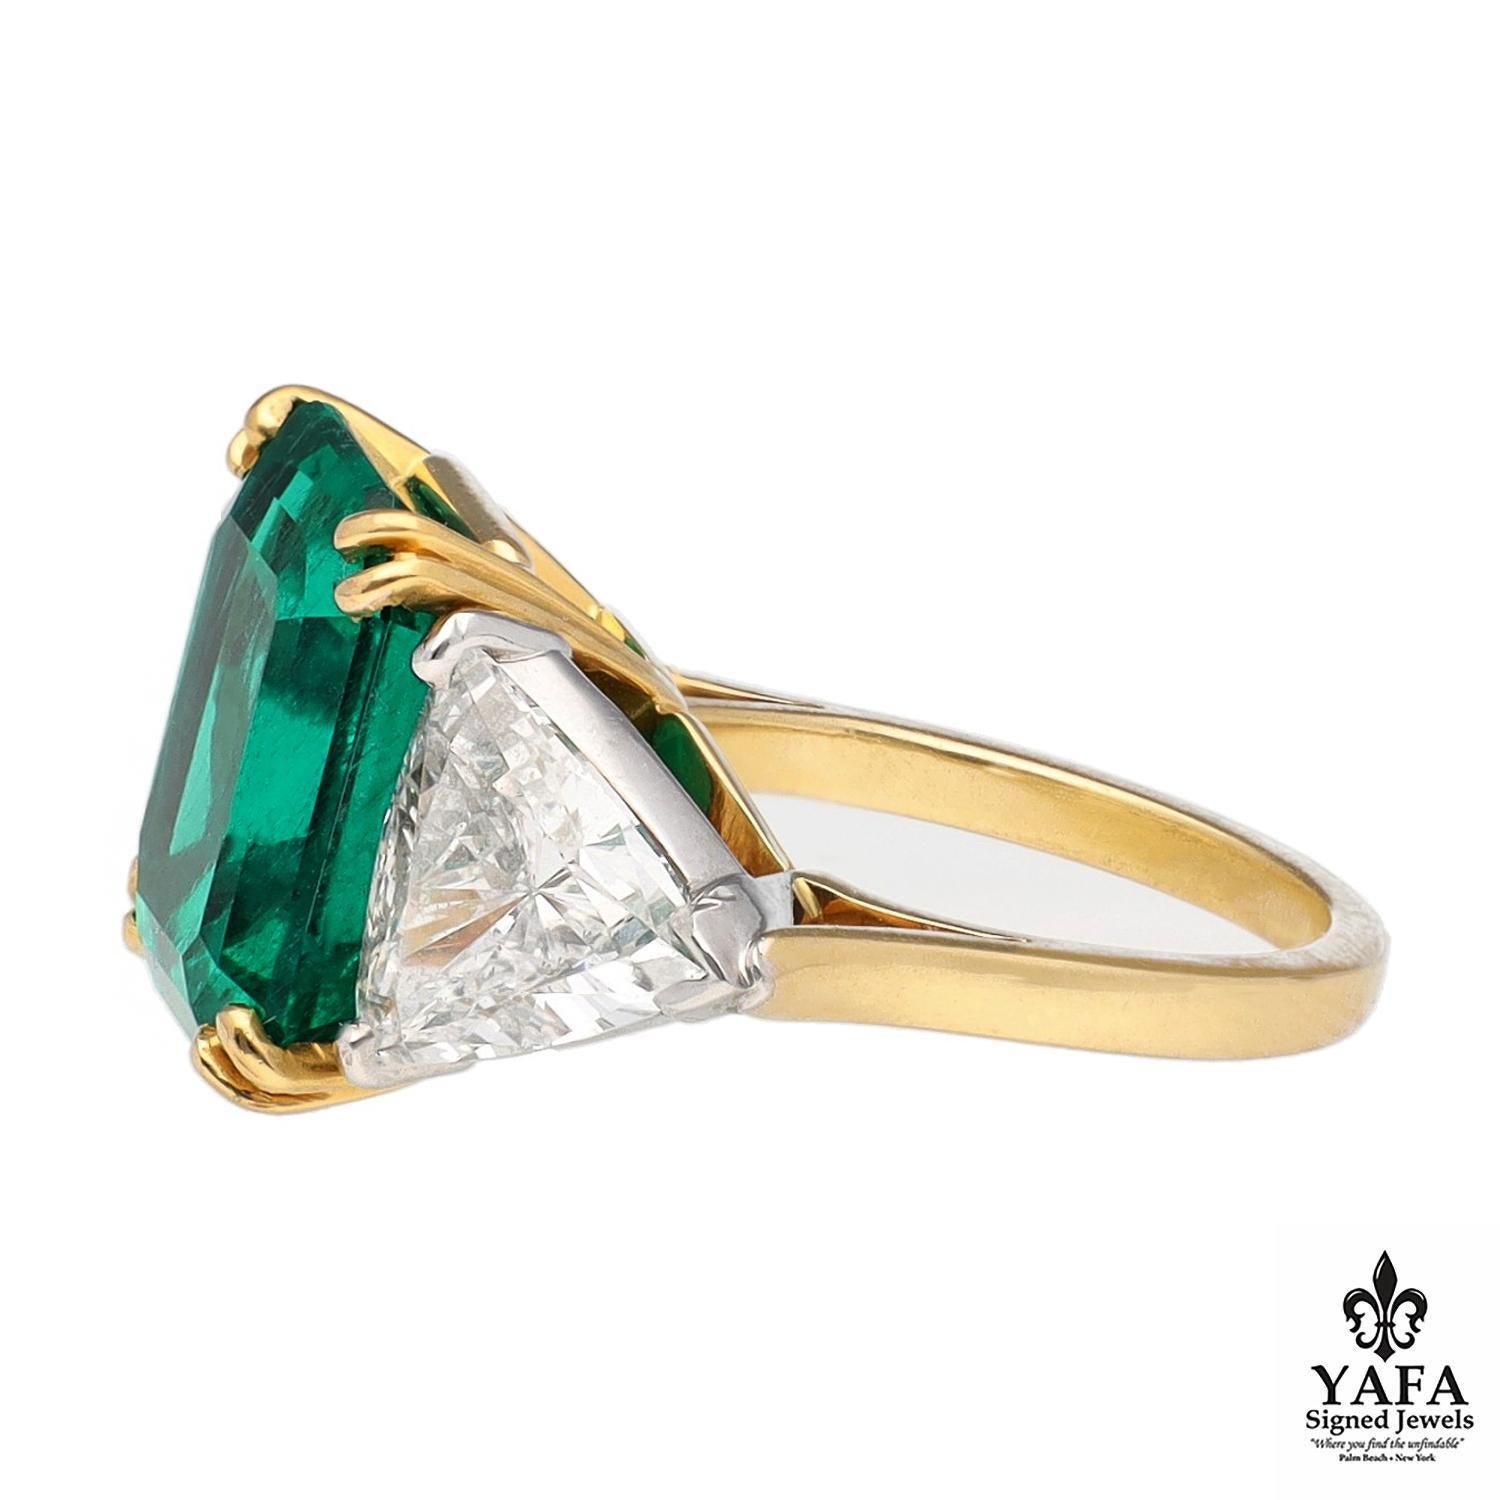 Platinum and 18K Yellow Gold Colombian Emerald and 2 - Triangular Shaped Diamond Ring.
Cleopatra is perhaps the most famous historical figure to cherish emerald gemstones. She even claimed ownership of all emerald mines in Egypt during her